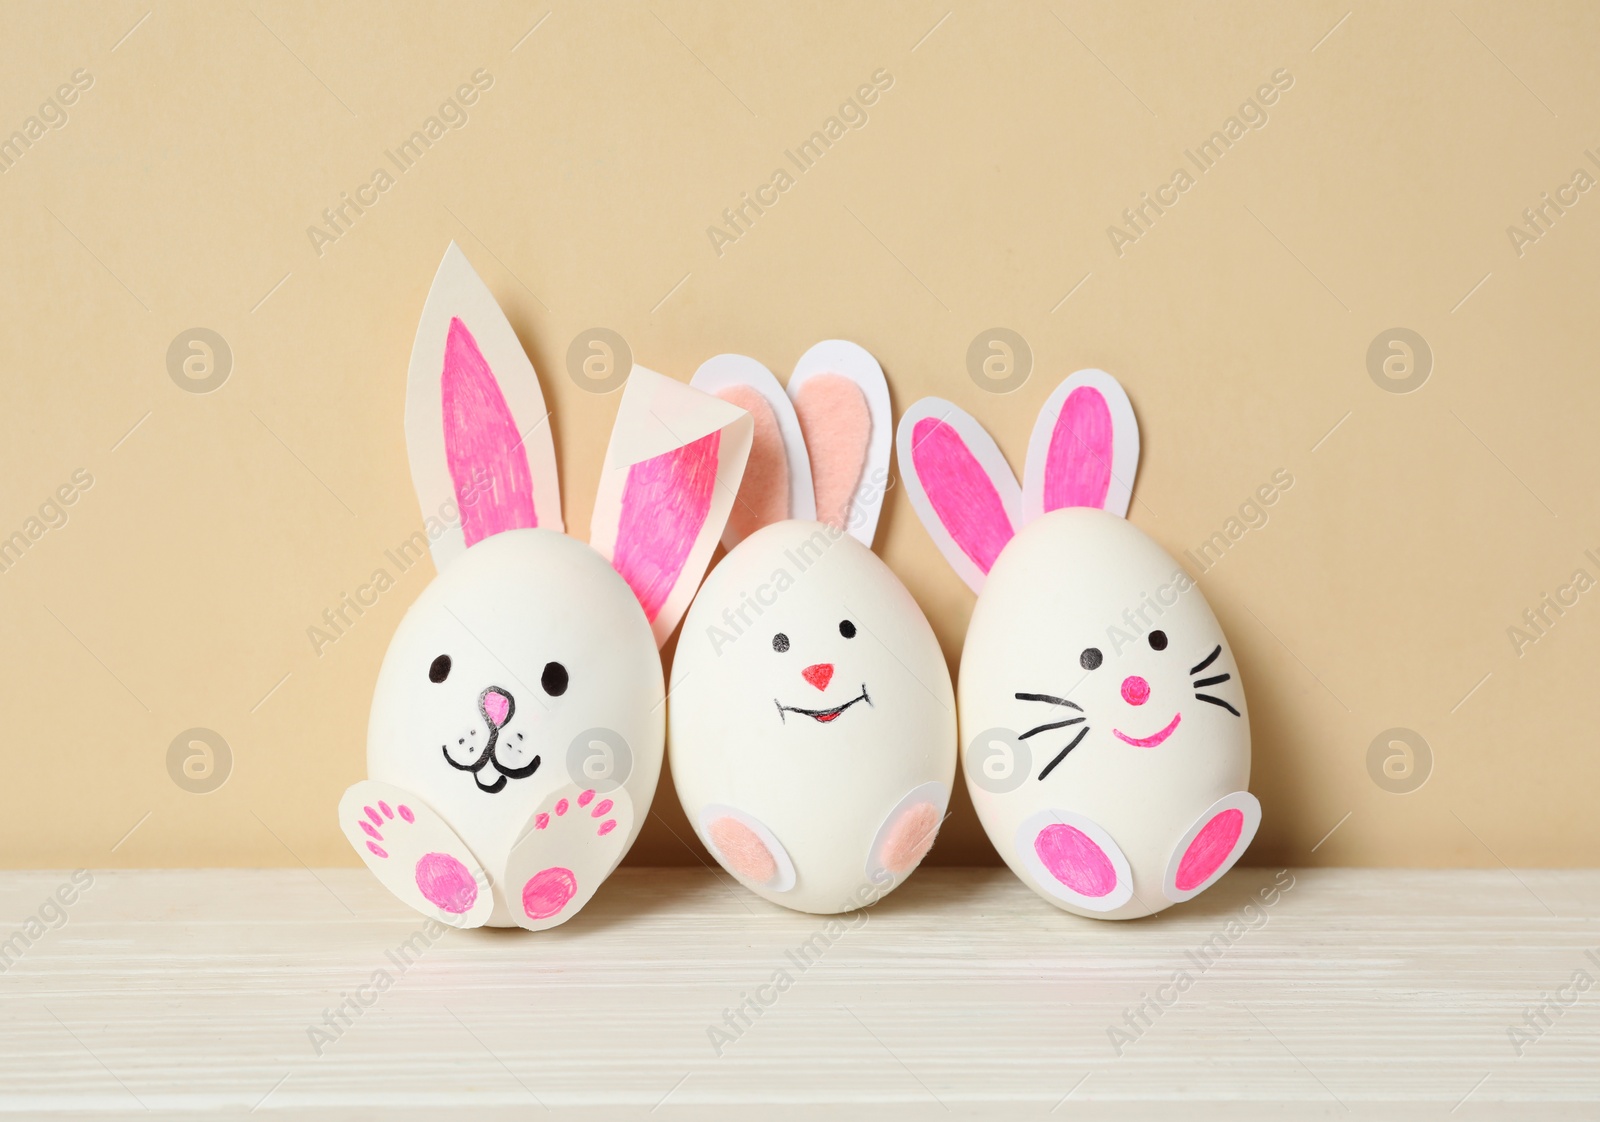 Photo of Eggs as cute bunnies on white wooden table against beige background. Easter celebration